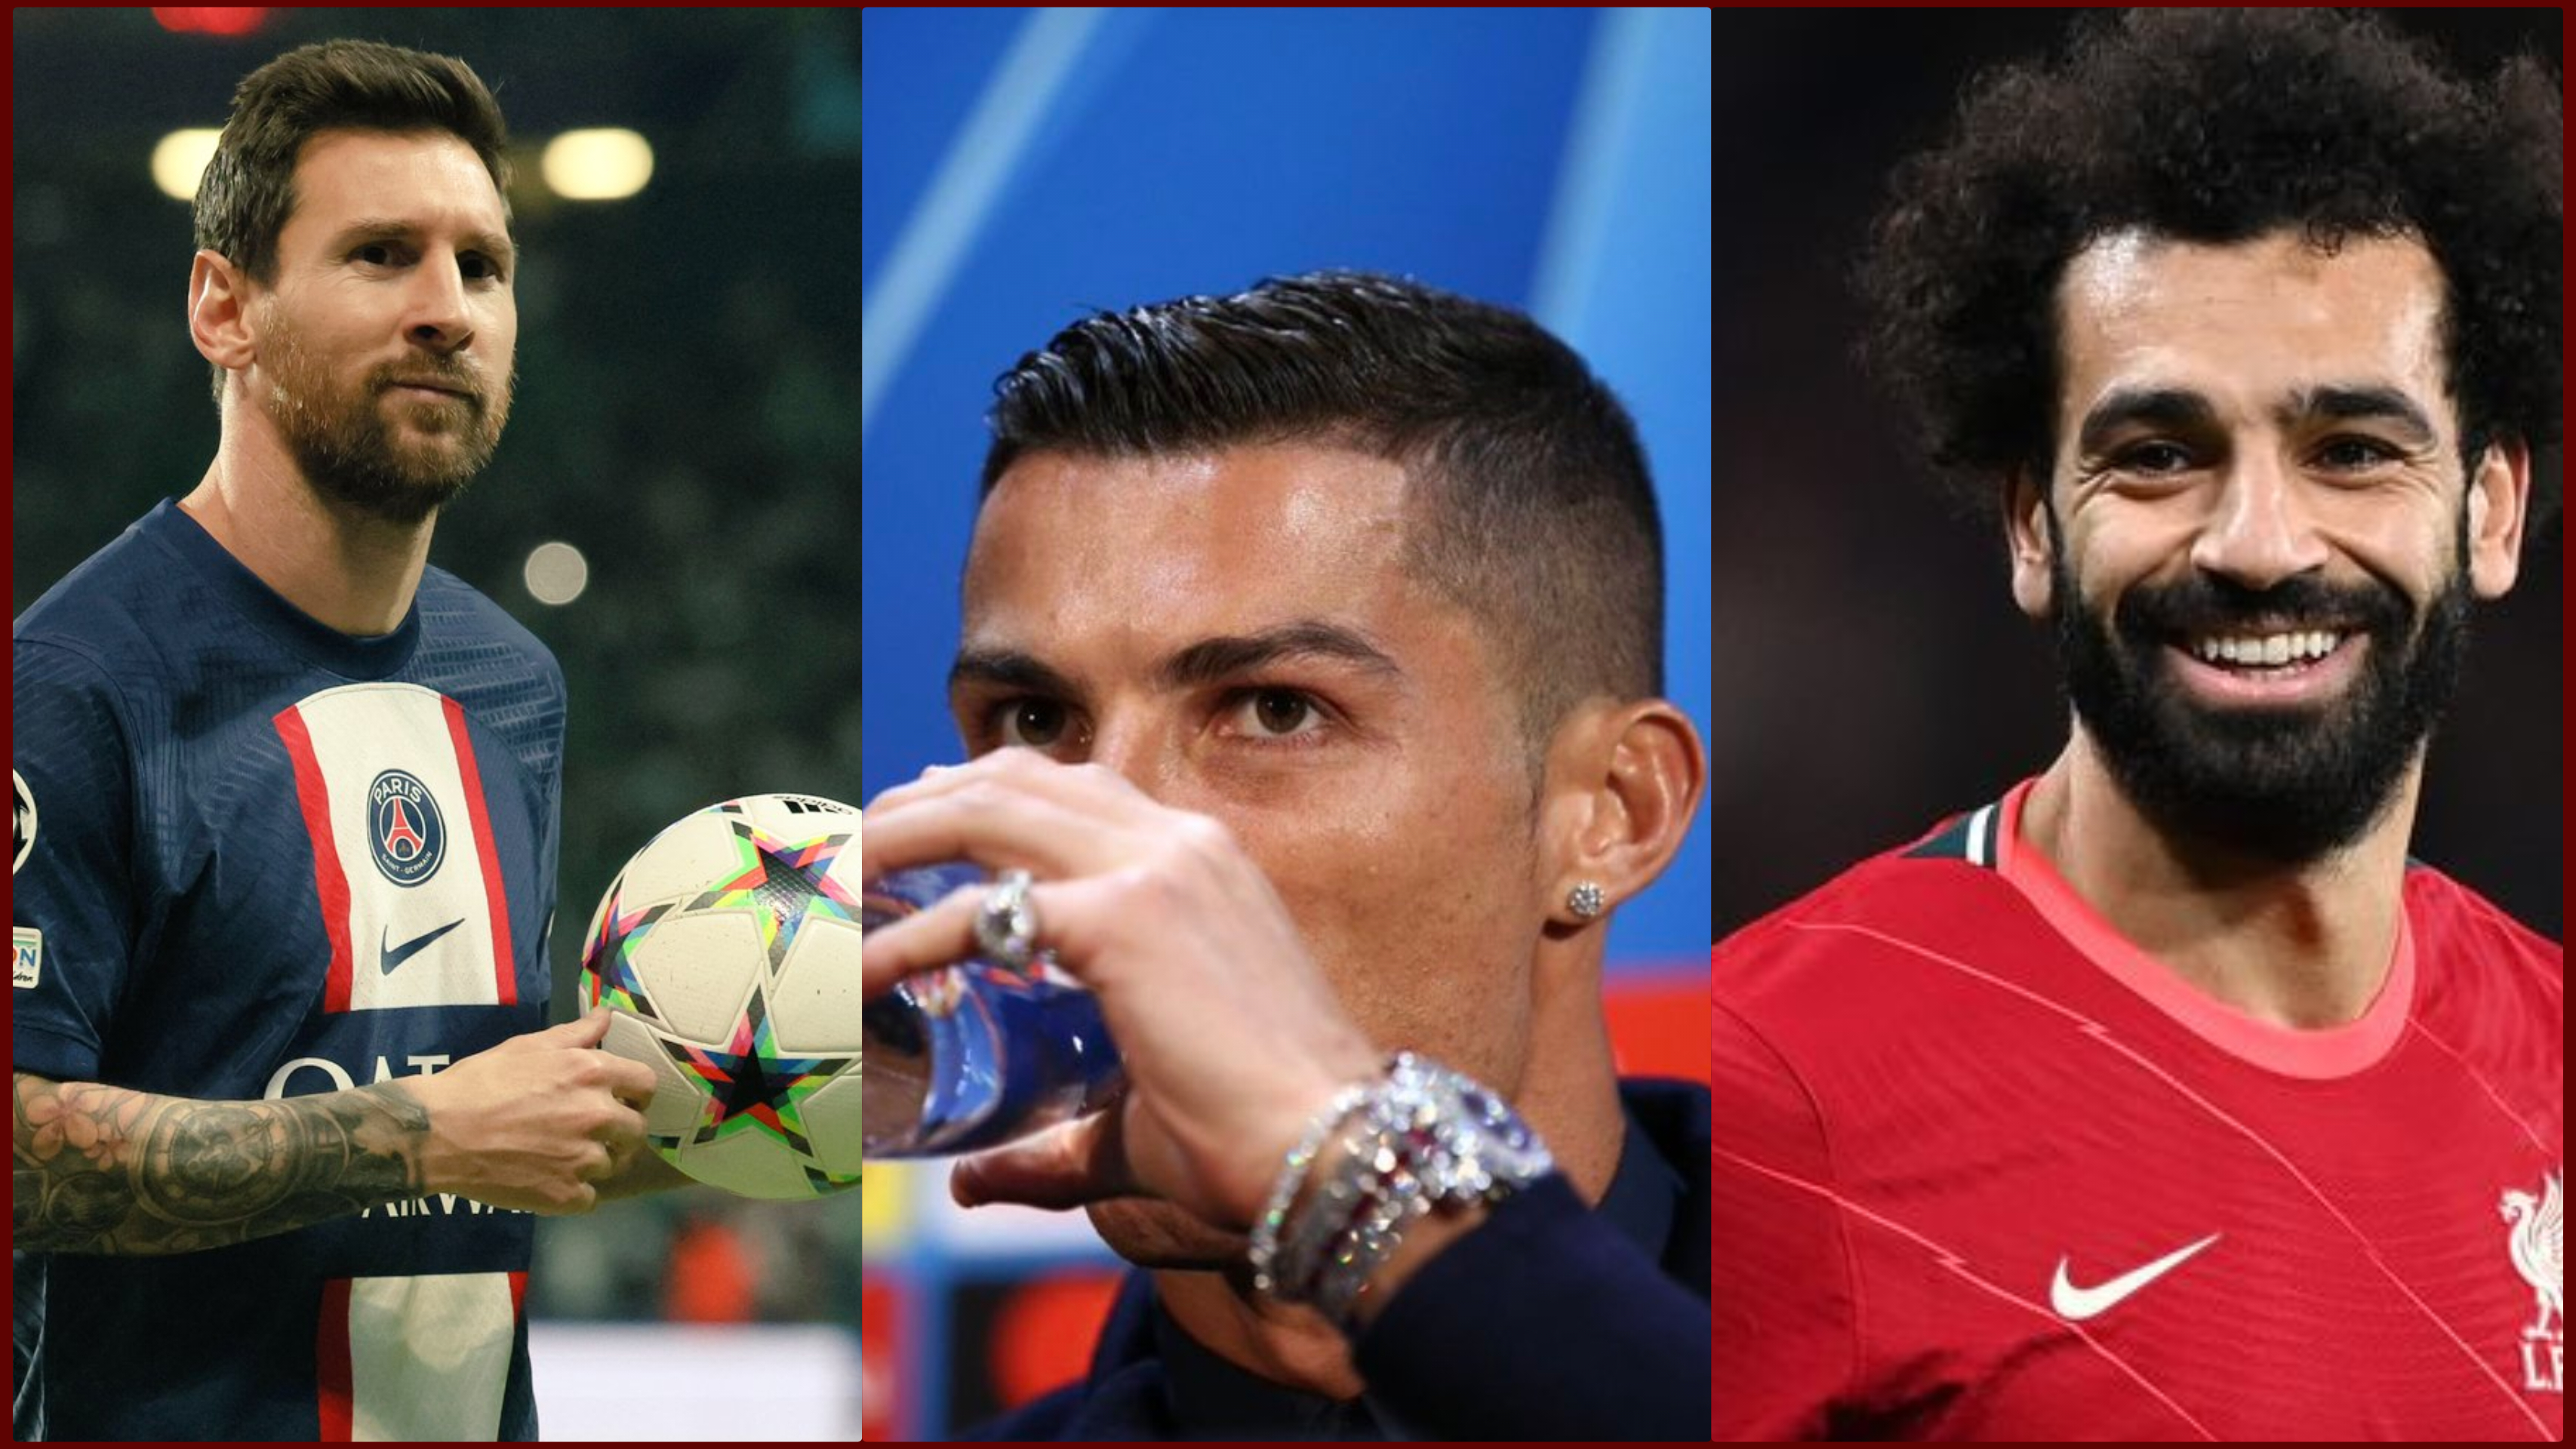 Mohamed Salah, Ronaldo and Messi are some of the most popular footballers in the world